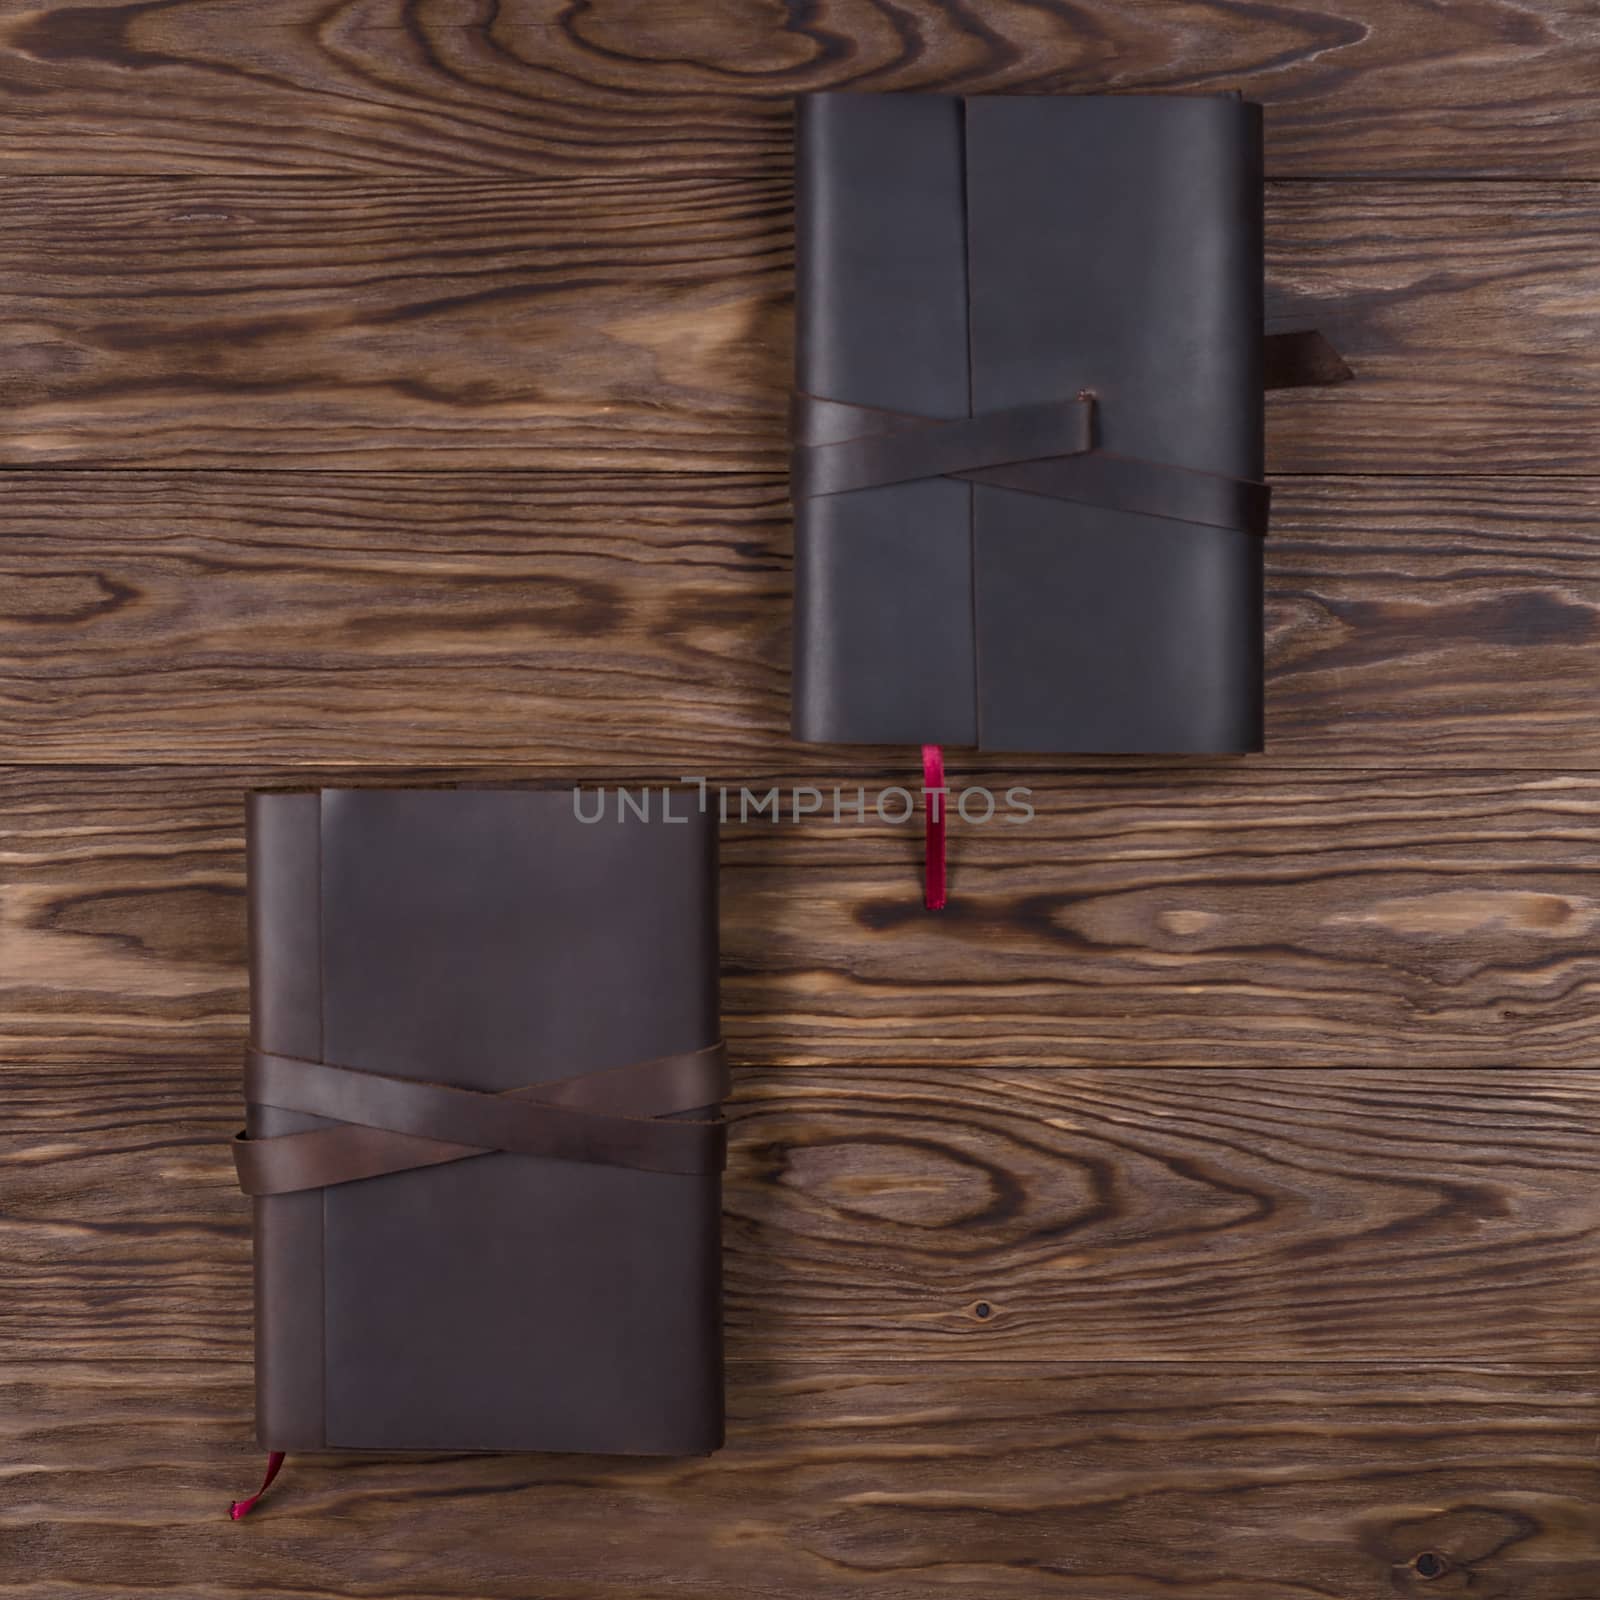 Black and brown handmade leather notebook cover with notebook on wooden background. Stock photo of luxury business accessories. Up to down view.